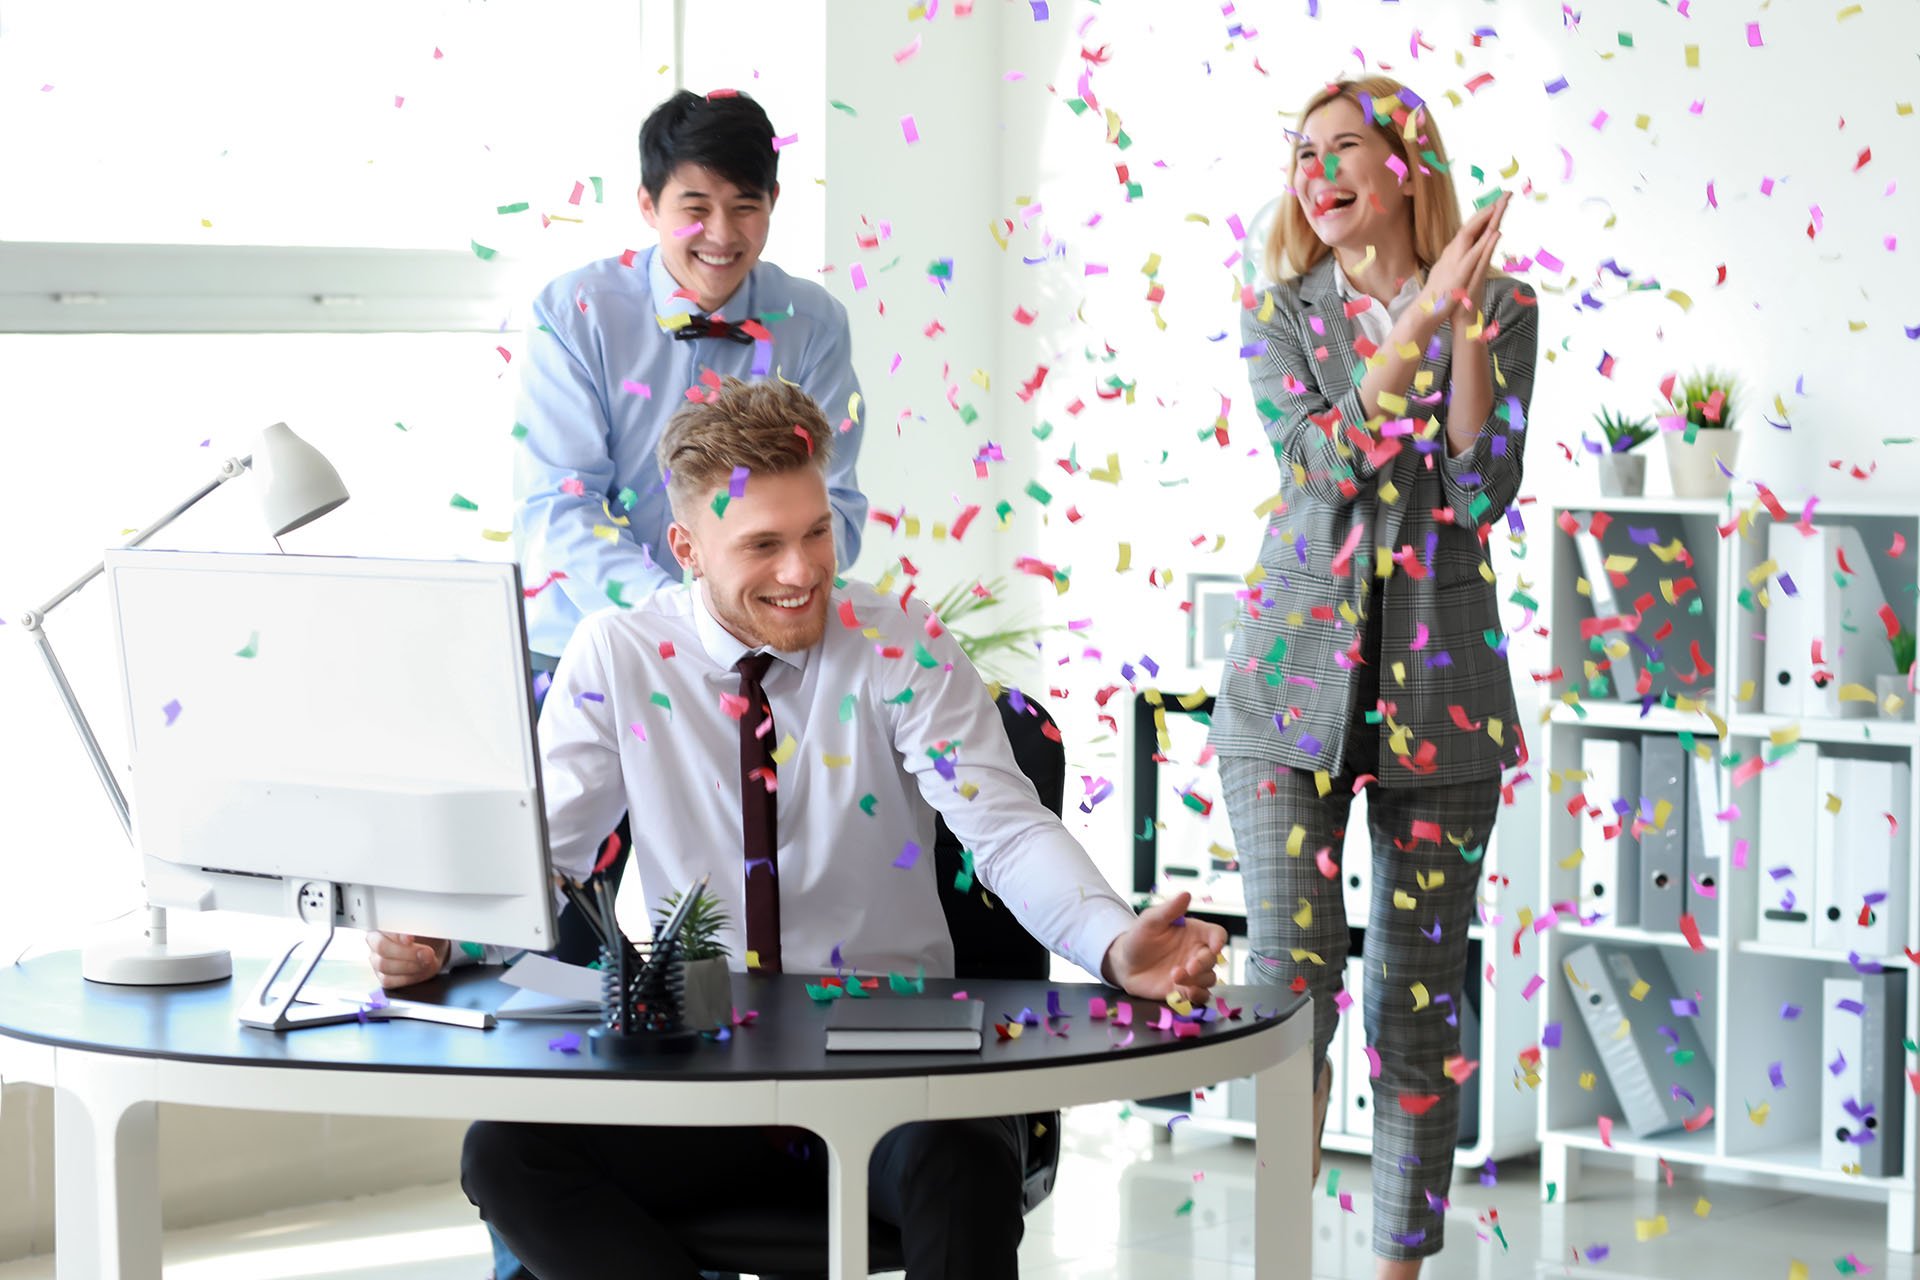 Two men and a woman are showered with confetti at a new employee's desk